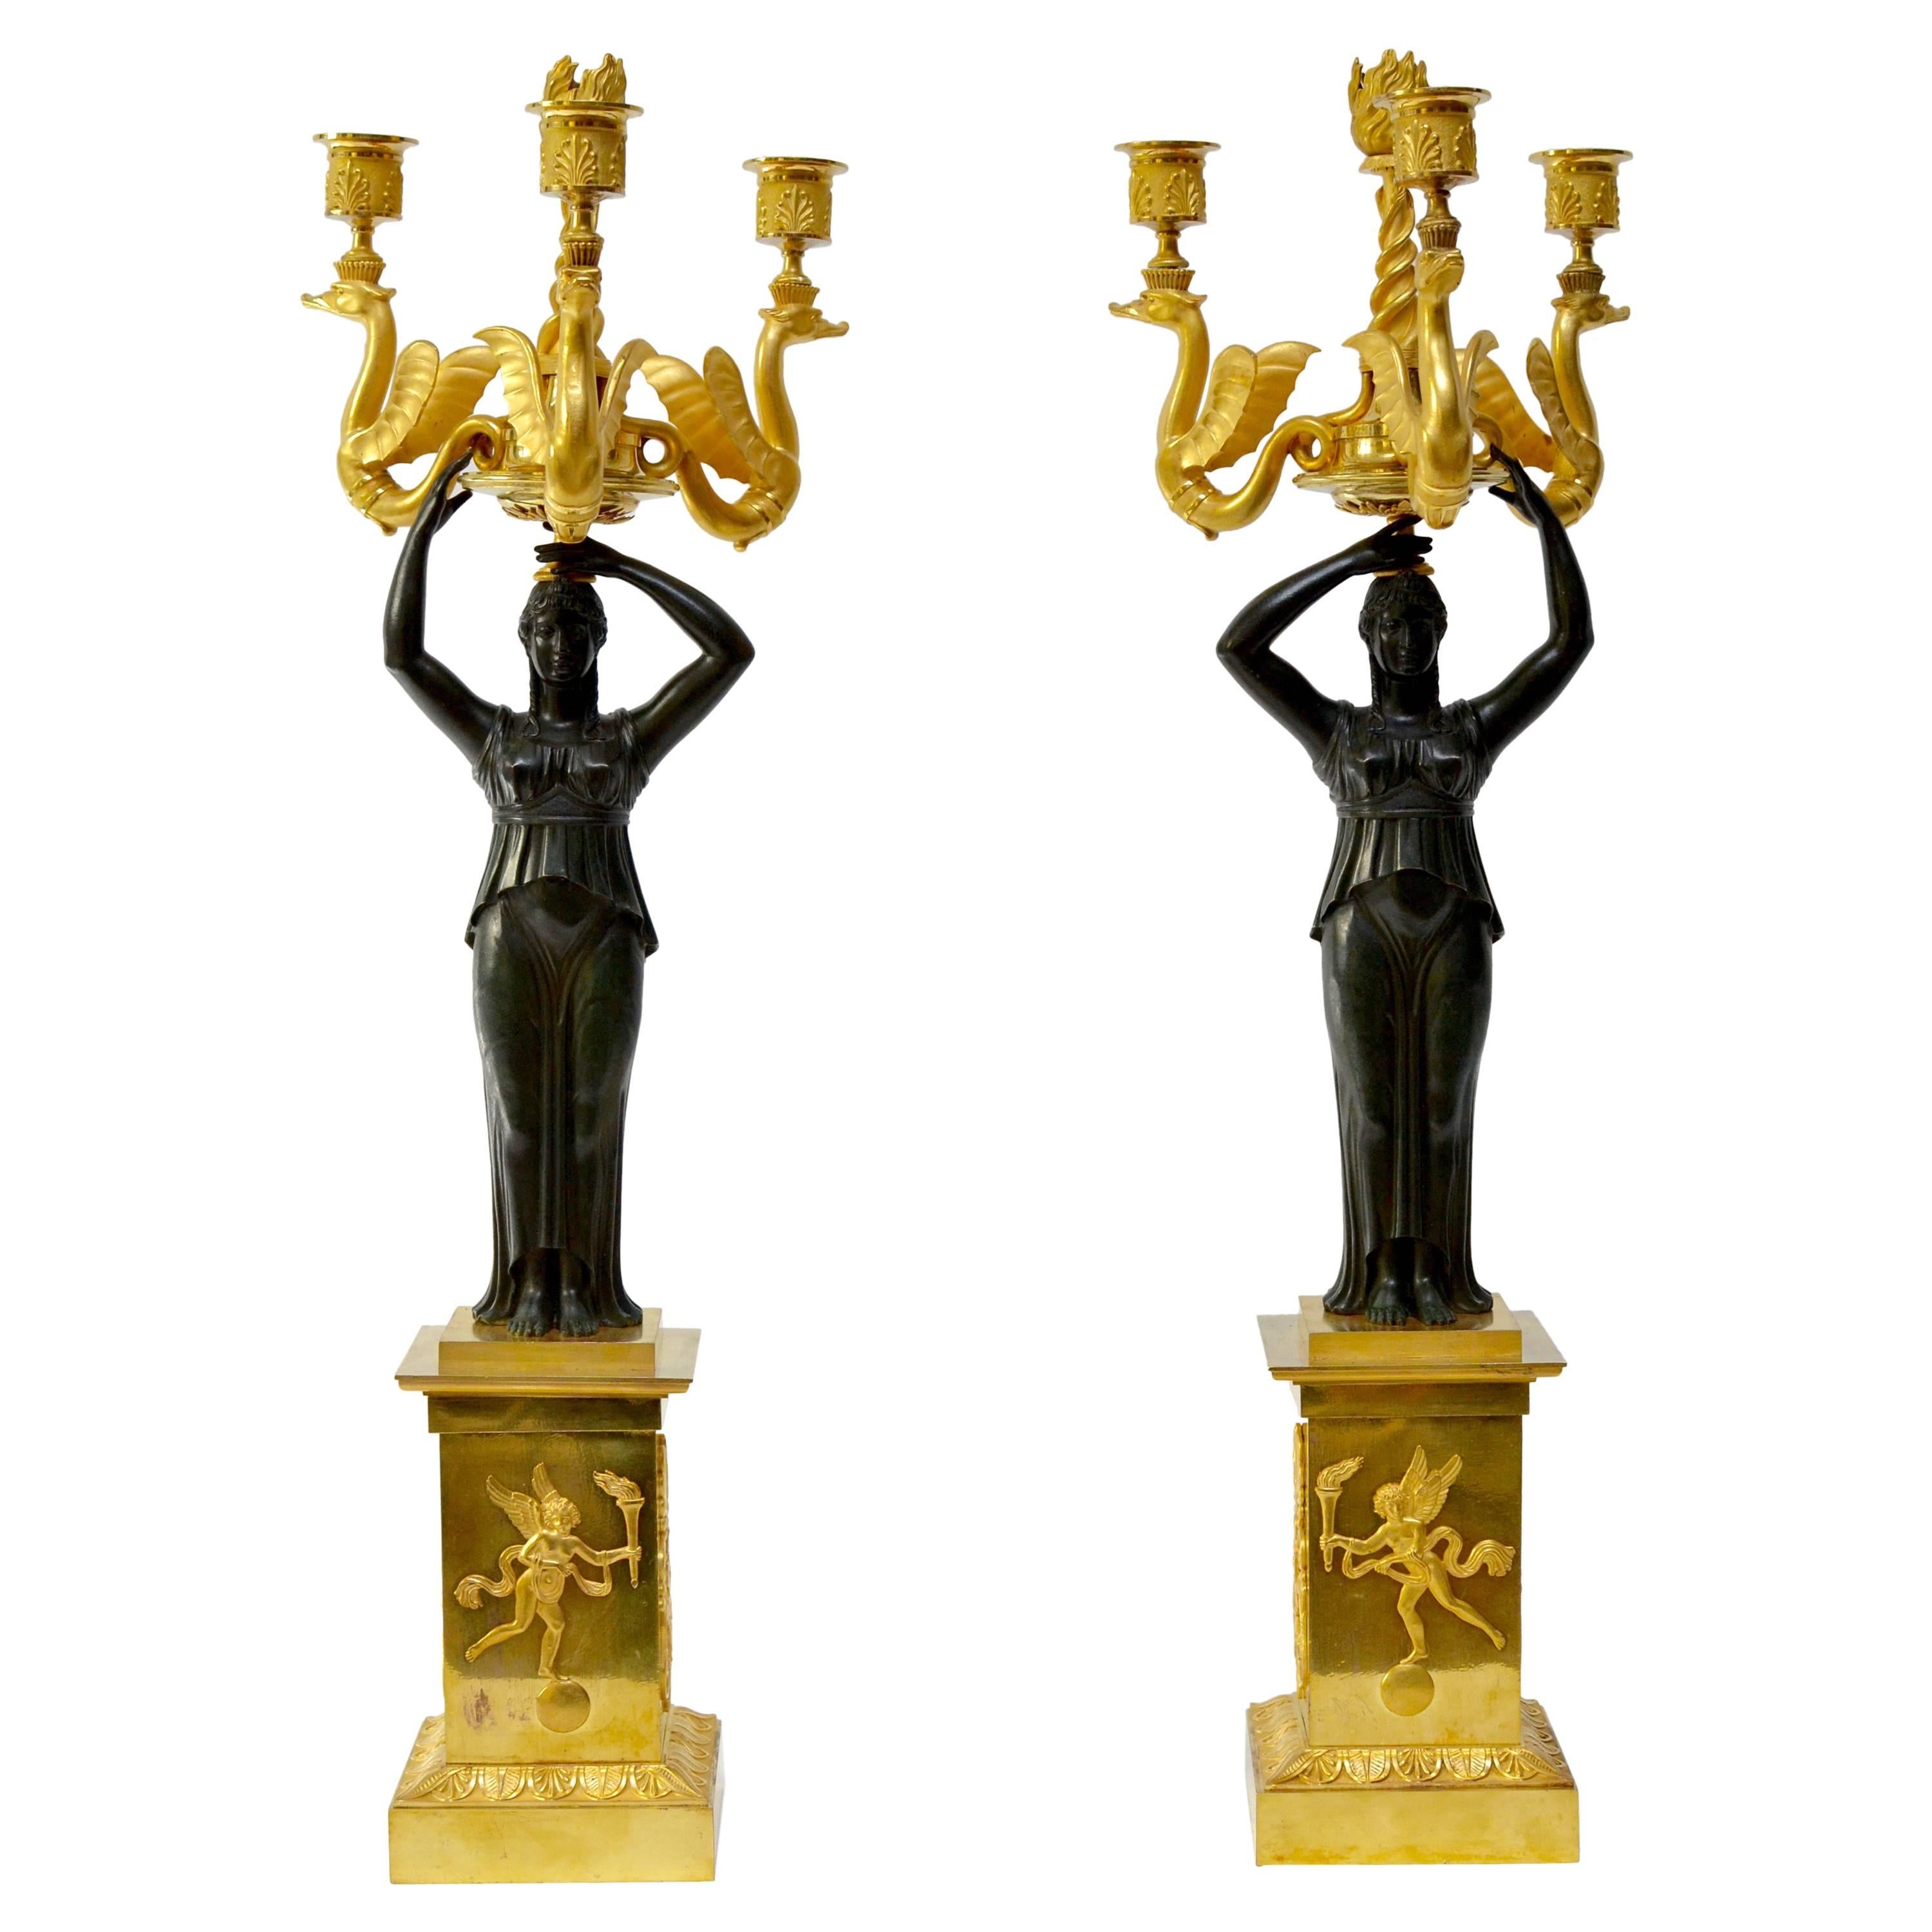 Pair of Russian Empire Gilt Bronze and Patinated Candelabra 